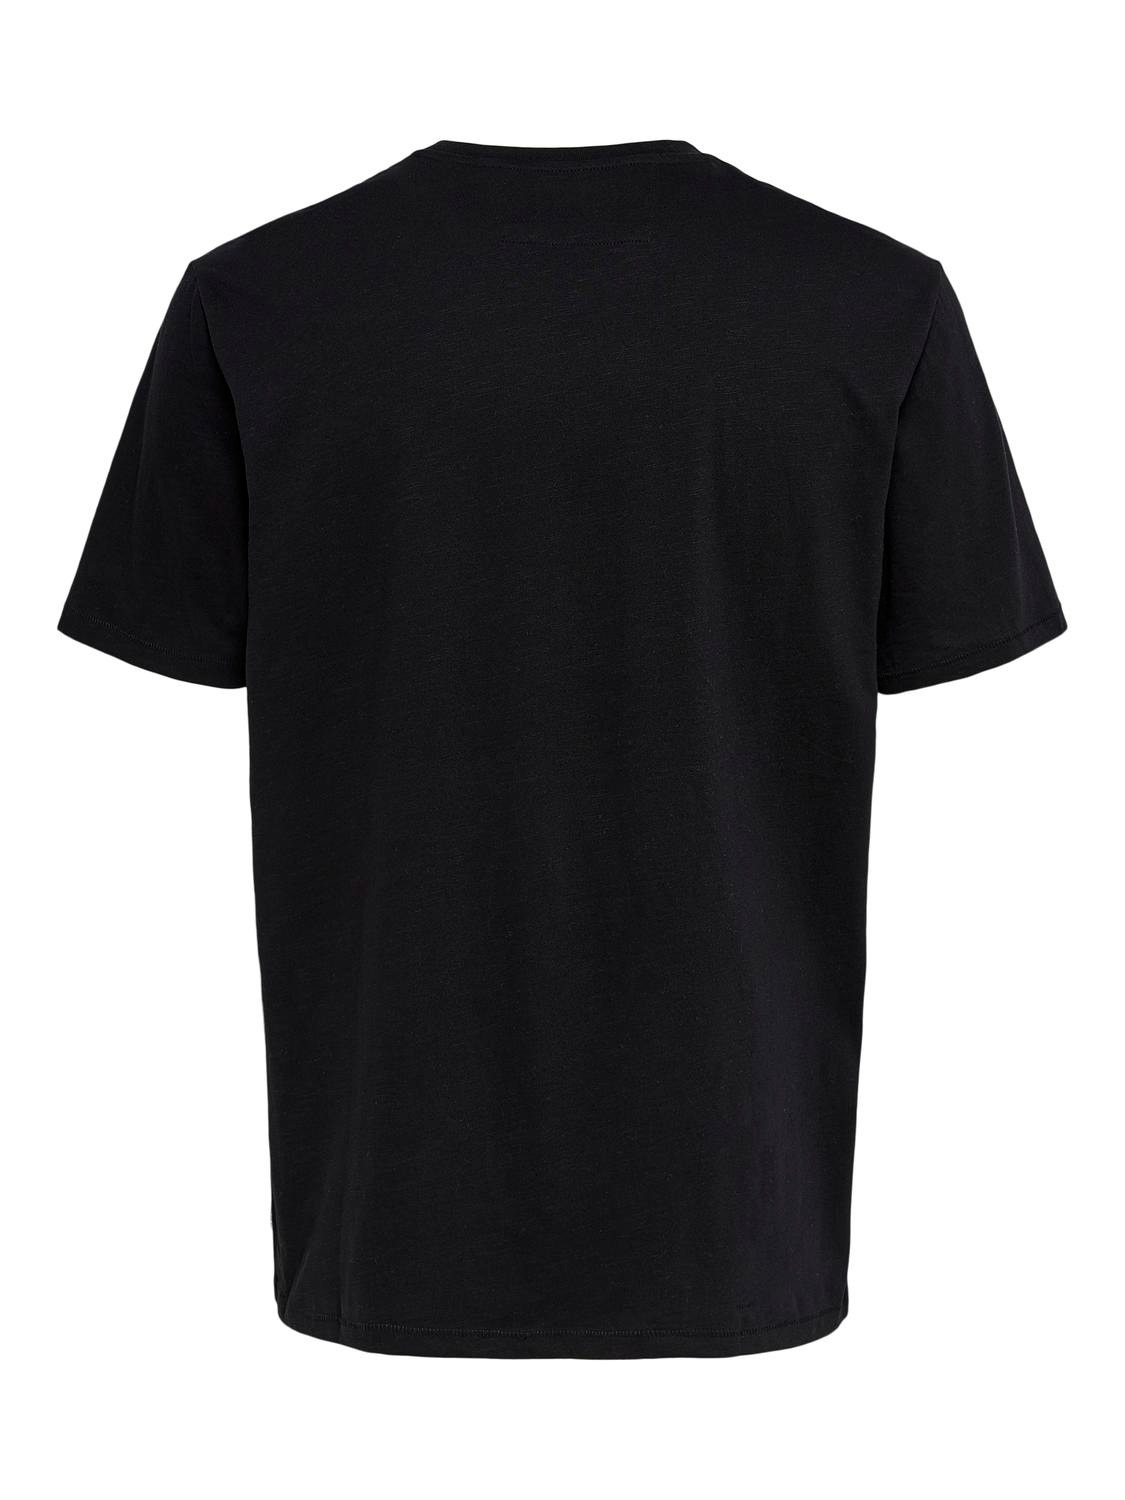 ONLY & SONS O-hals t-shirt -Black - 22020074